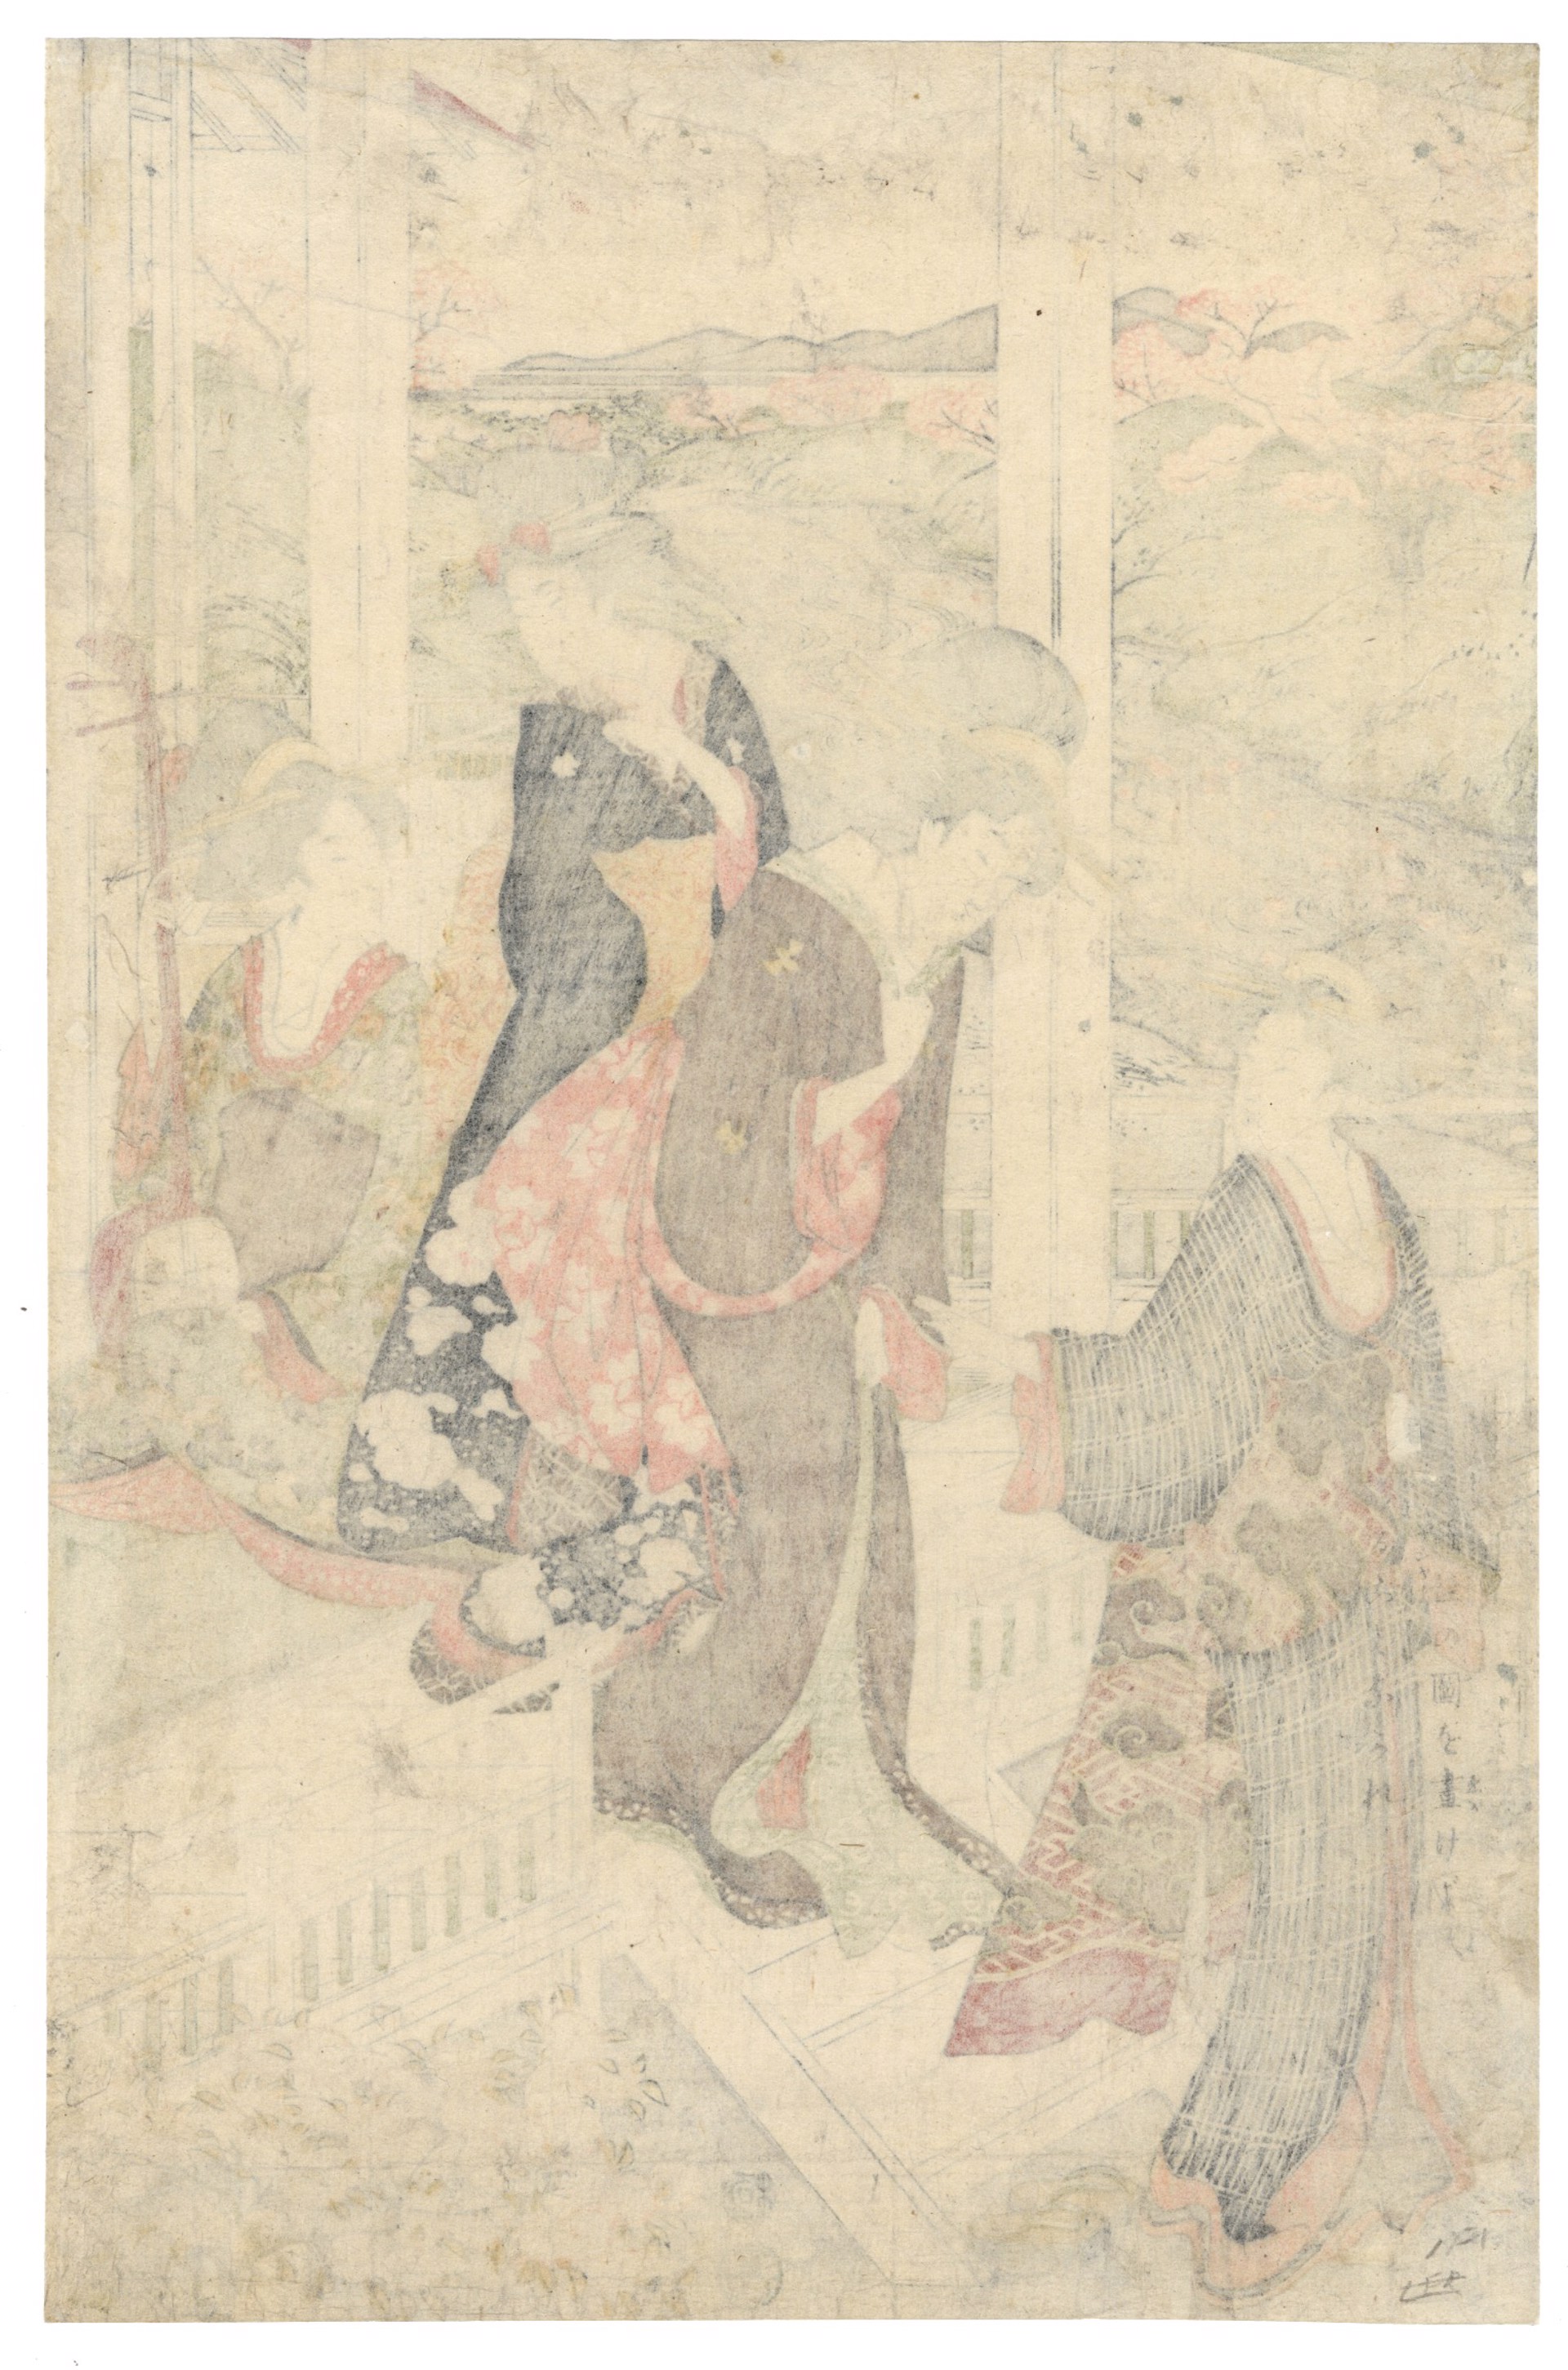 Beauties Viewing Cherry Blossoms from a Veranda by a River by Utamaro